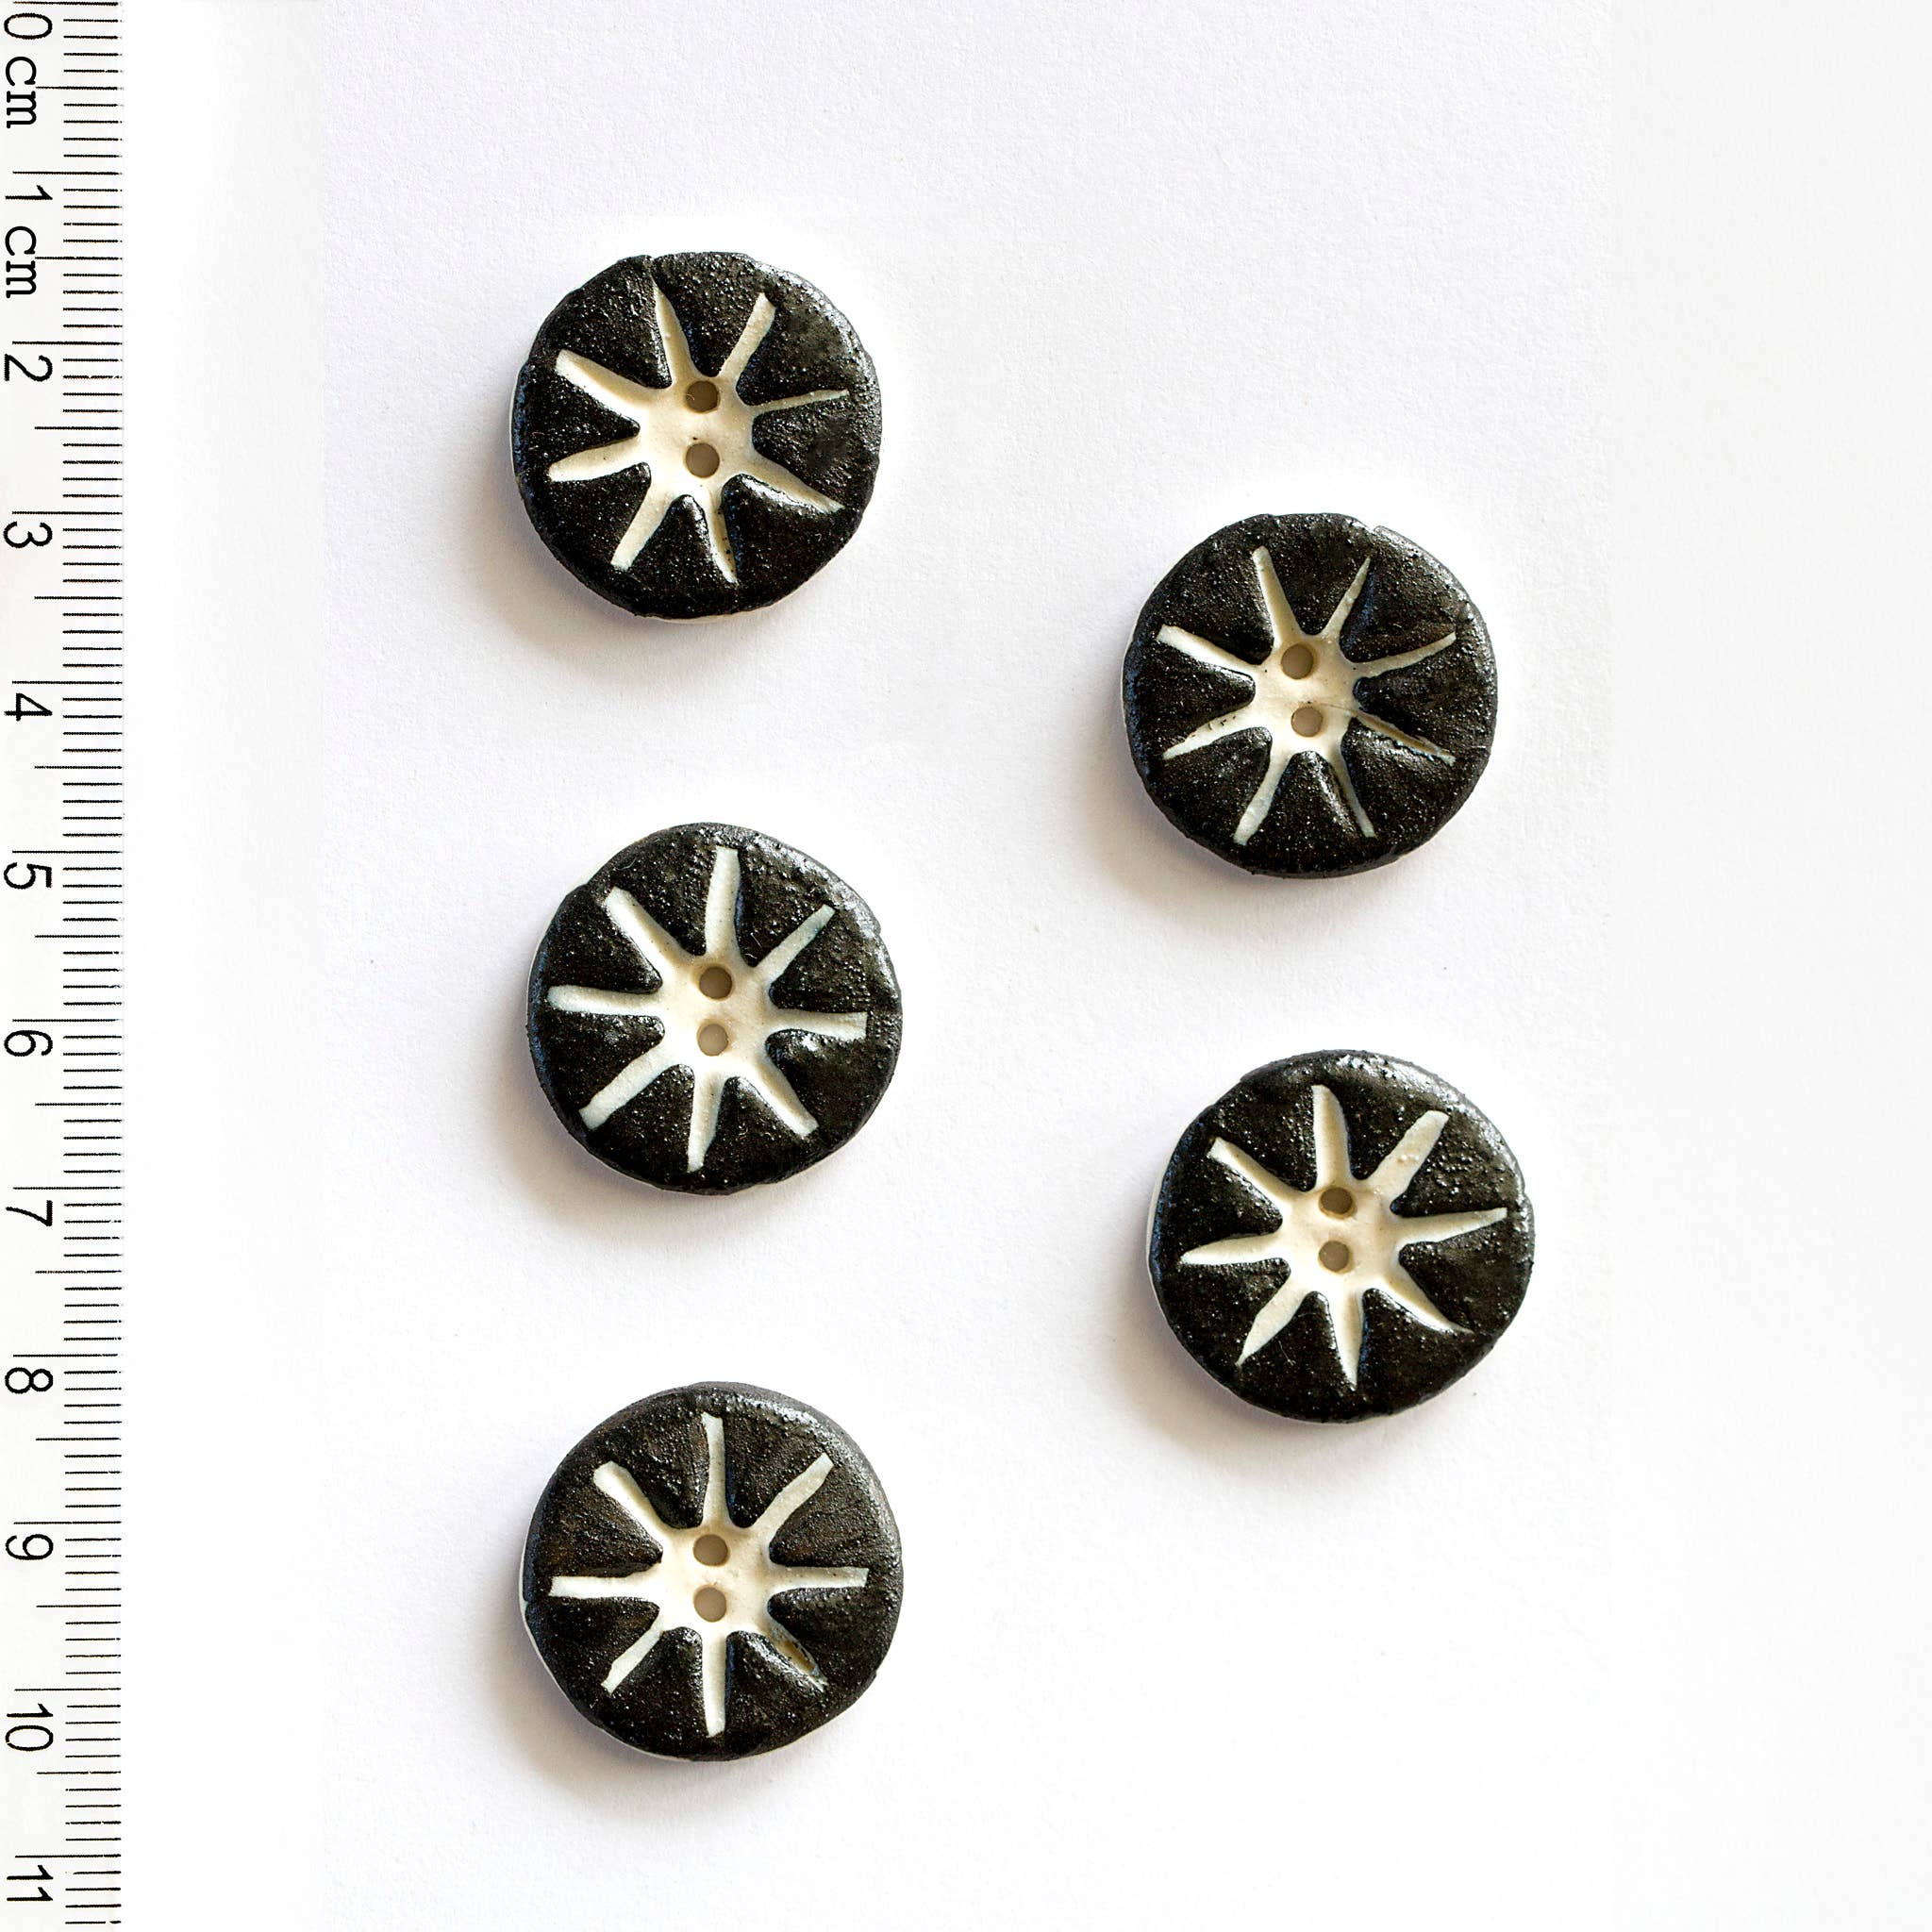 Incomparable Buttons - 5 Black Star Patterned Buttons